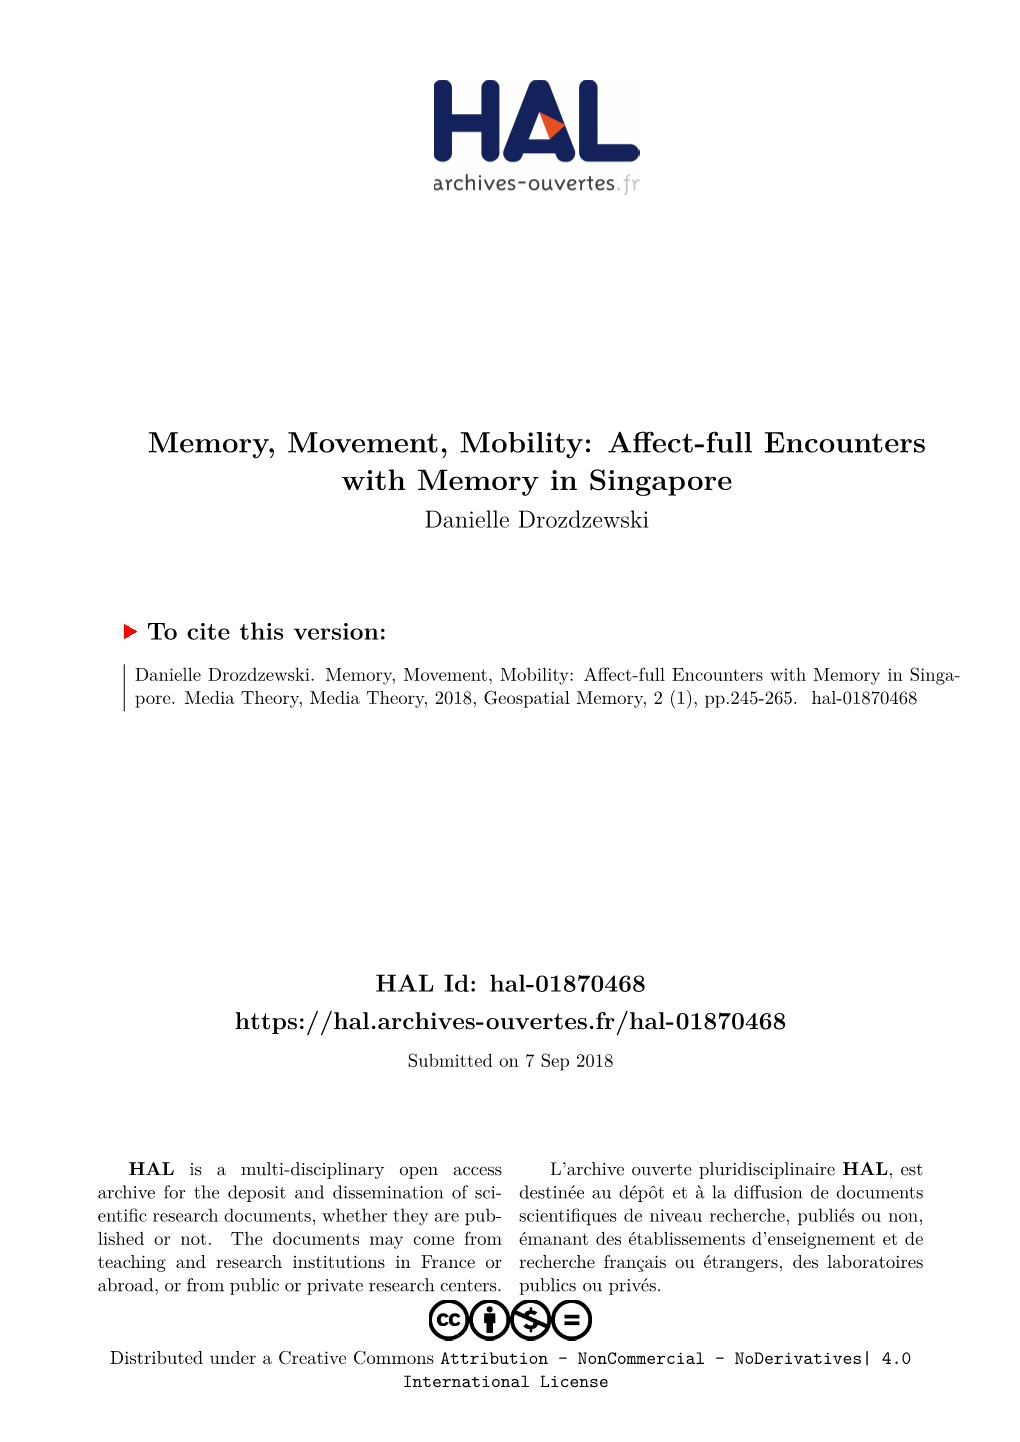 Memory, Movement, Mobility: Affect-Full Encounters with Memory in Singapore Danielle Drozdzewski